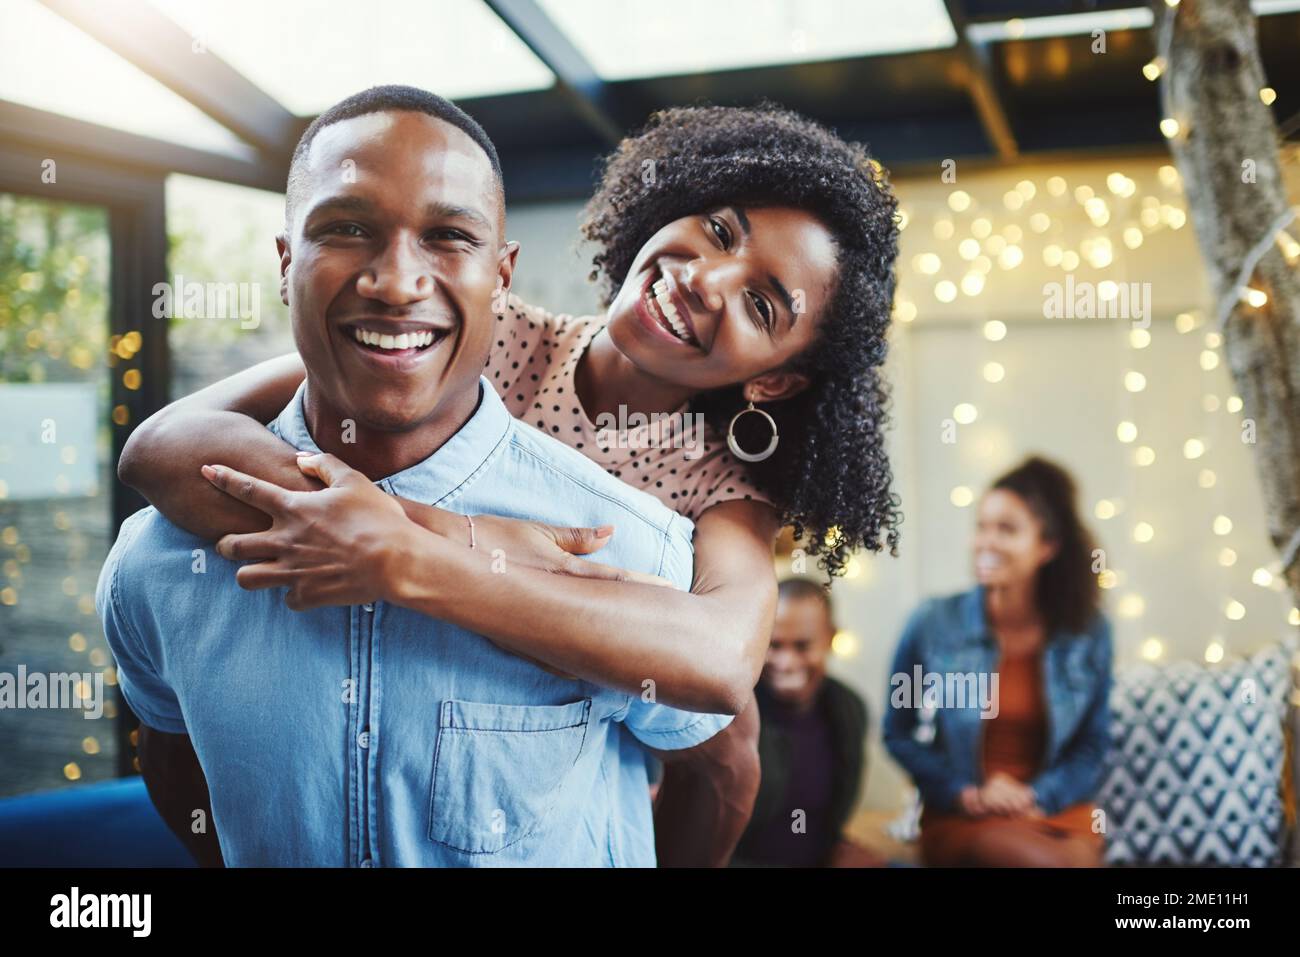 Make time for date night. a happy young couple out on a date. Stock Photo